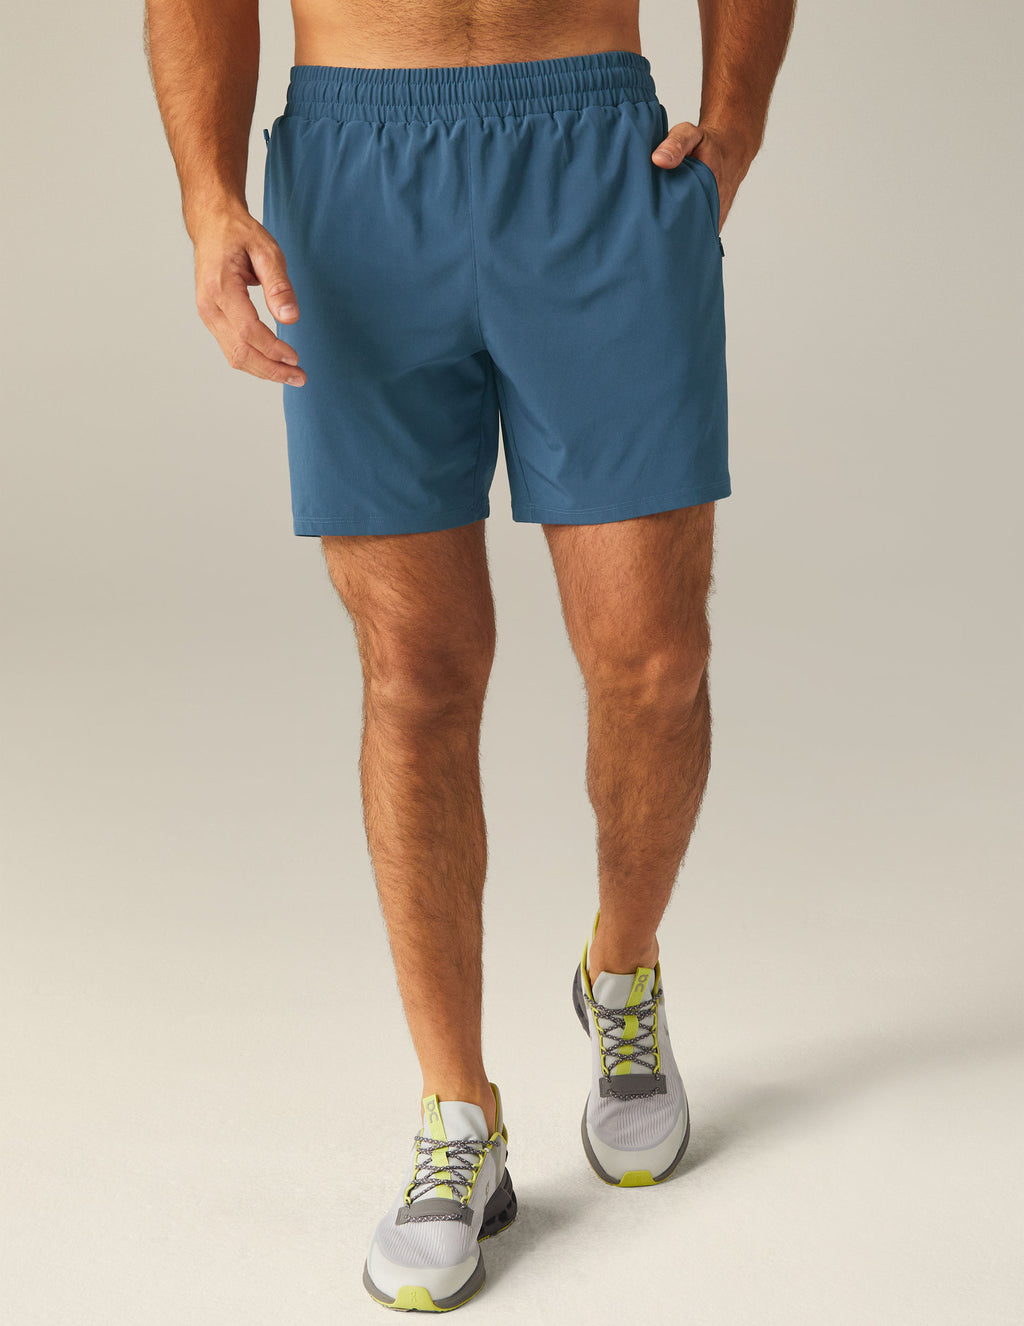 Pivotal Men's Performance Lined Short Featured Image